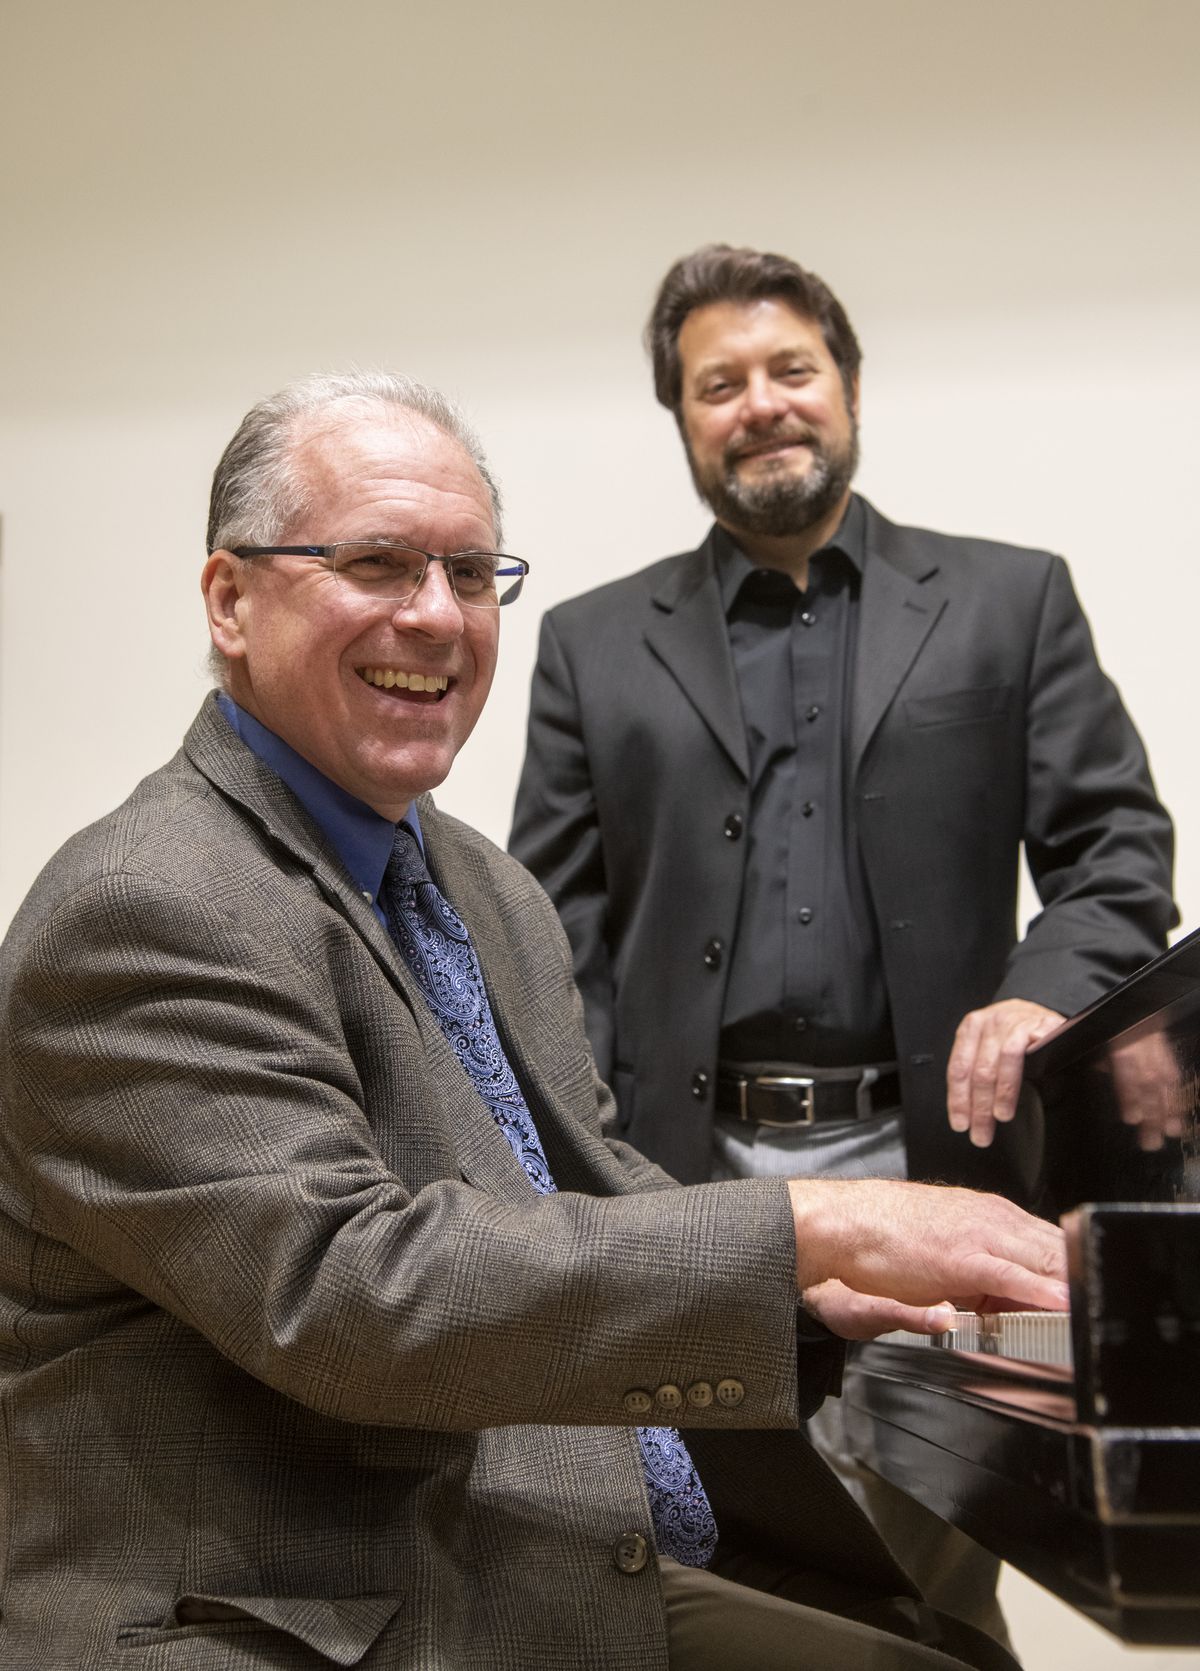 Whitworth professors Brent Edstrom, seated, and Philip Baldwin are both involved with the Peter Rivera and orchestra concert Friday. Edstrom charted a couple of song arrangements and Philip Baldwin will conduct the orchestra.  (Jesse Tinsley/THE SPOKESMAN-REVIEW)